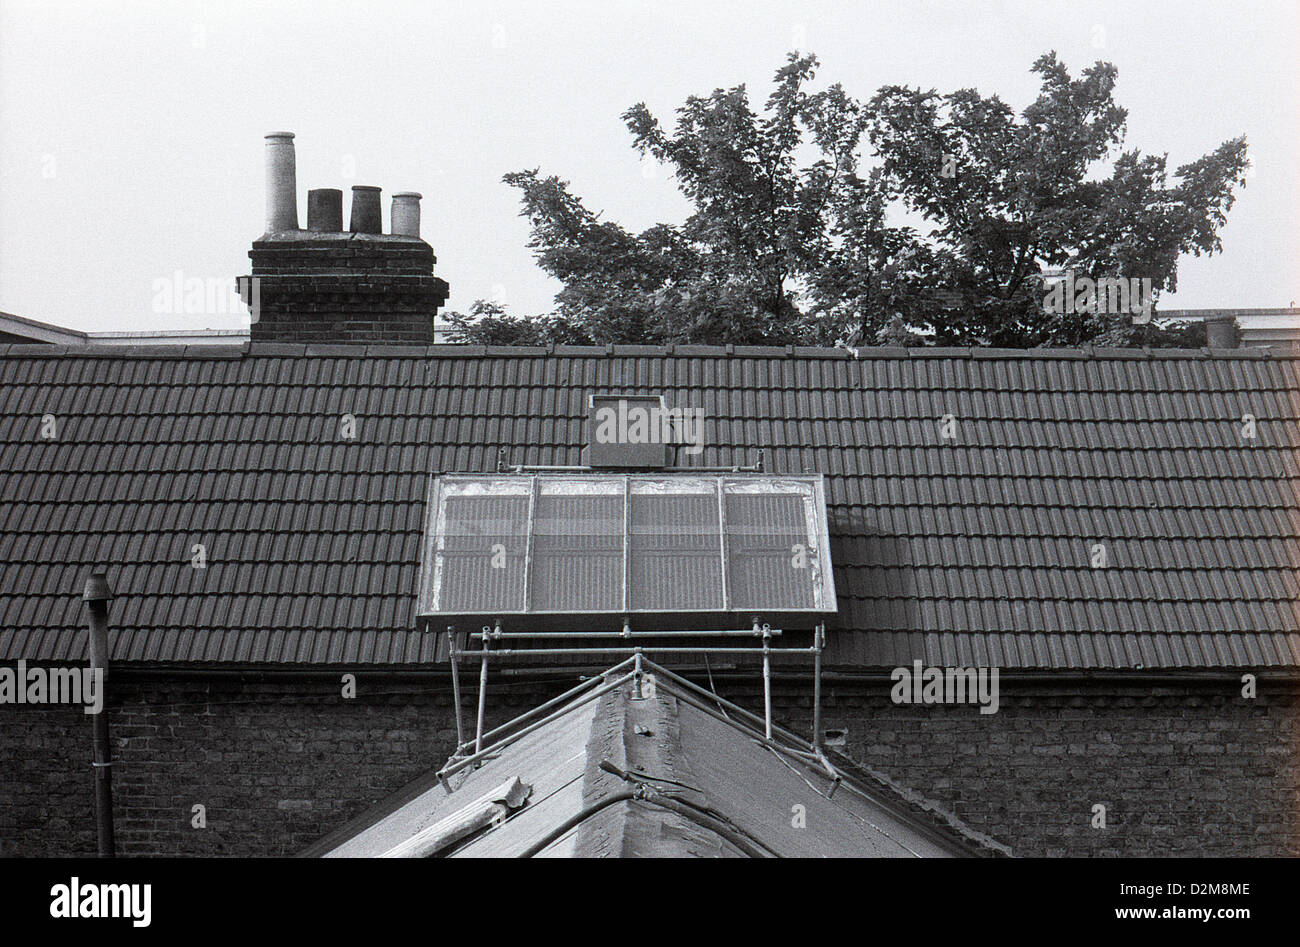 Solar panel panels on the roof of a commune communal squatted house squat property in 1974 Camberwell South London  England UK   KATHY DEWITT Stock Photo